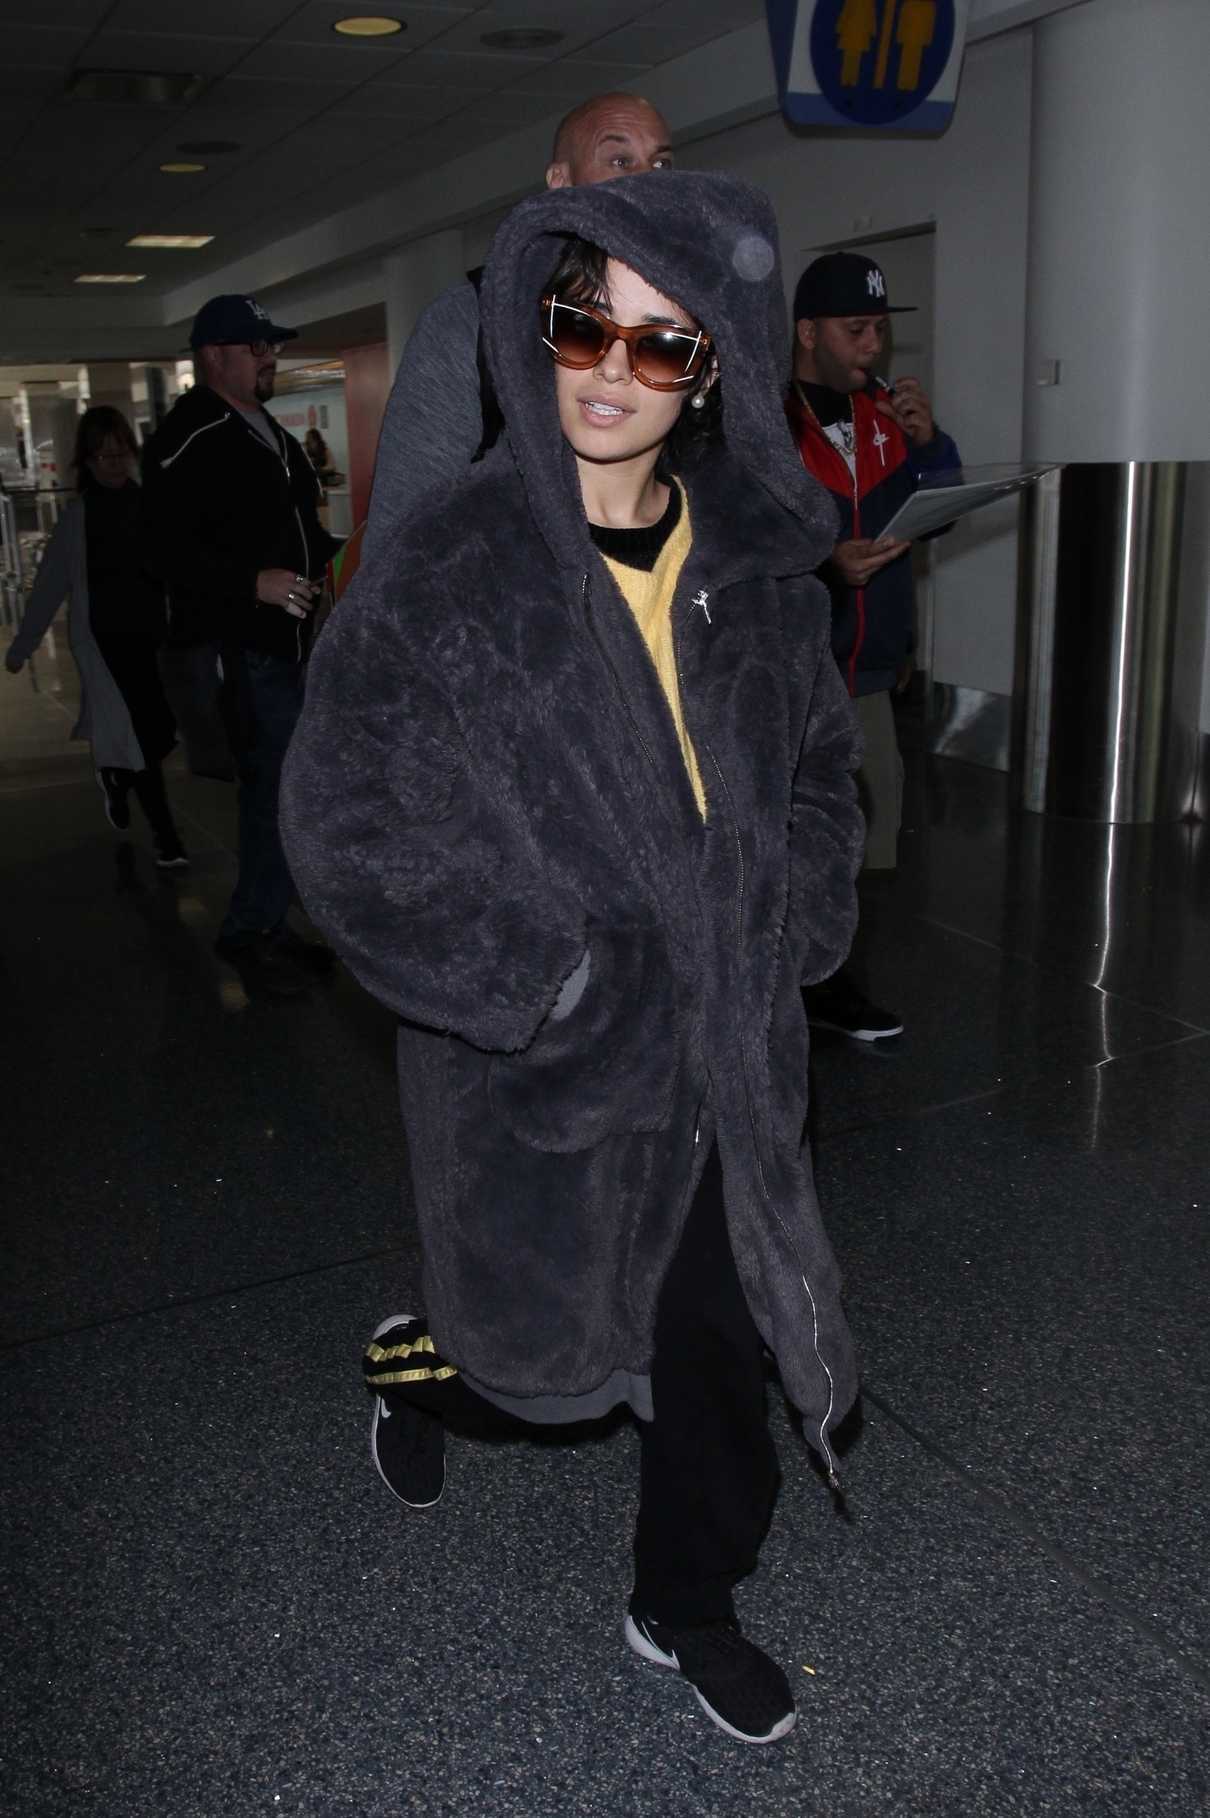 Camila Cabello Wears a Large Fur Coat at LAX Airport in Los Angeles 04/08/2018-5